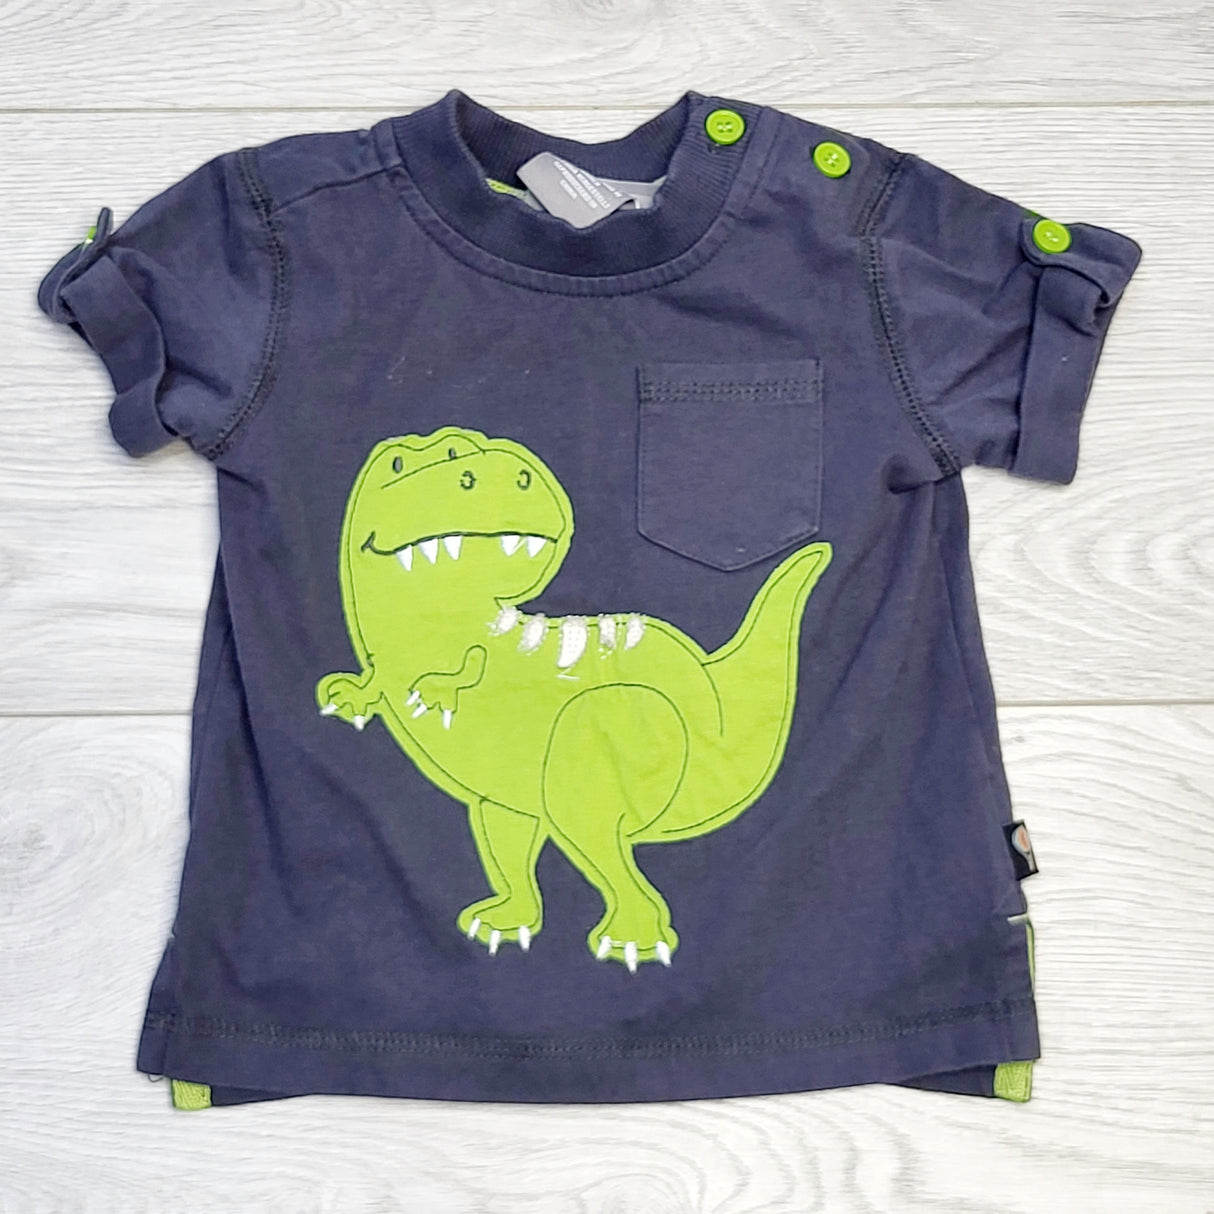 CHOL1 - Jarvis Archer grey t-shirt with dinosaur, 3-6 months